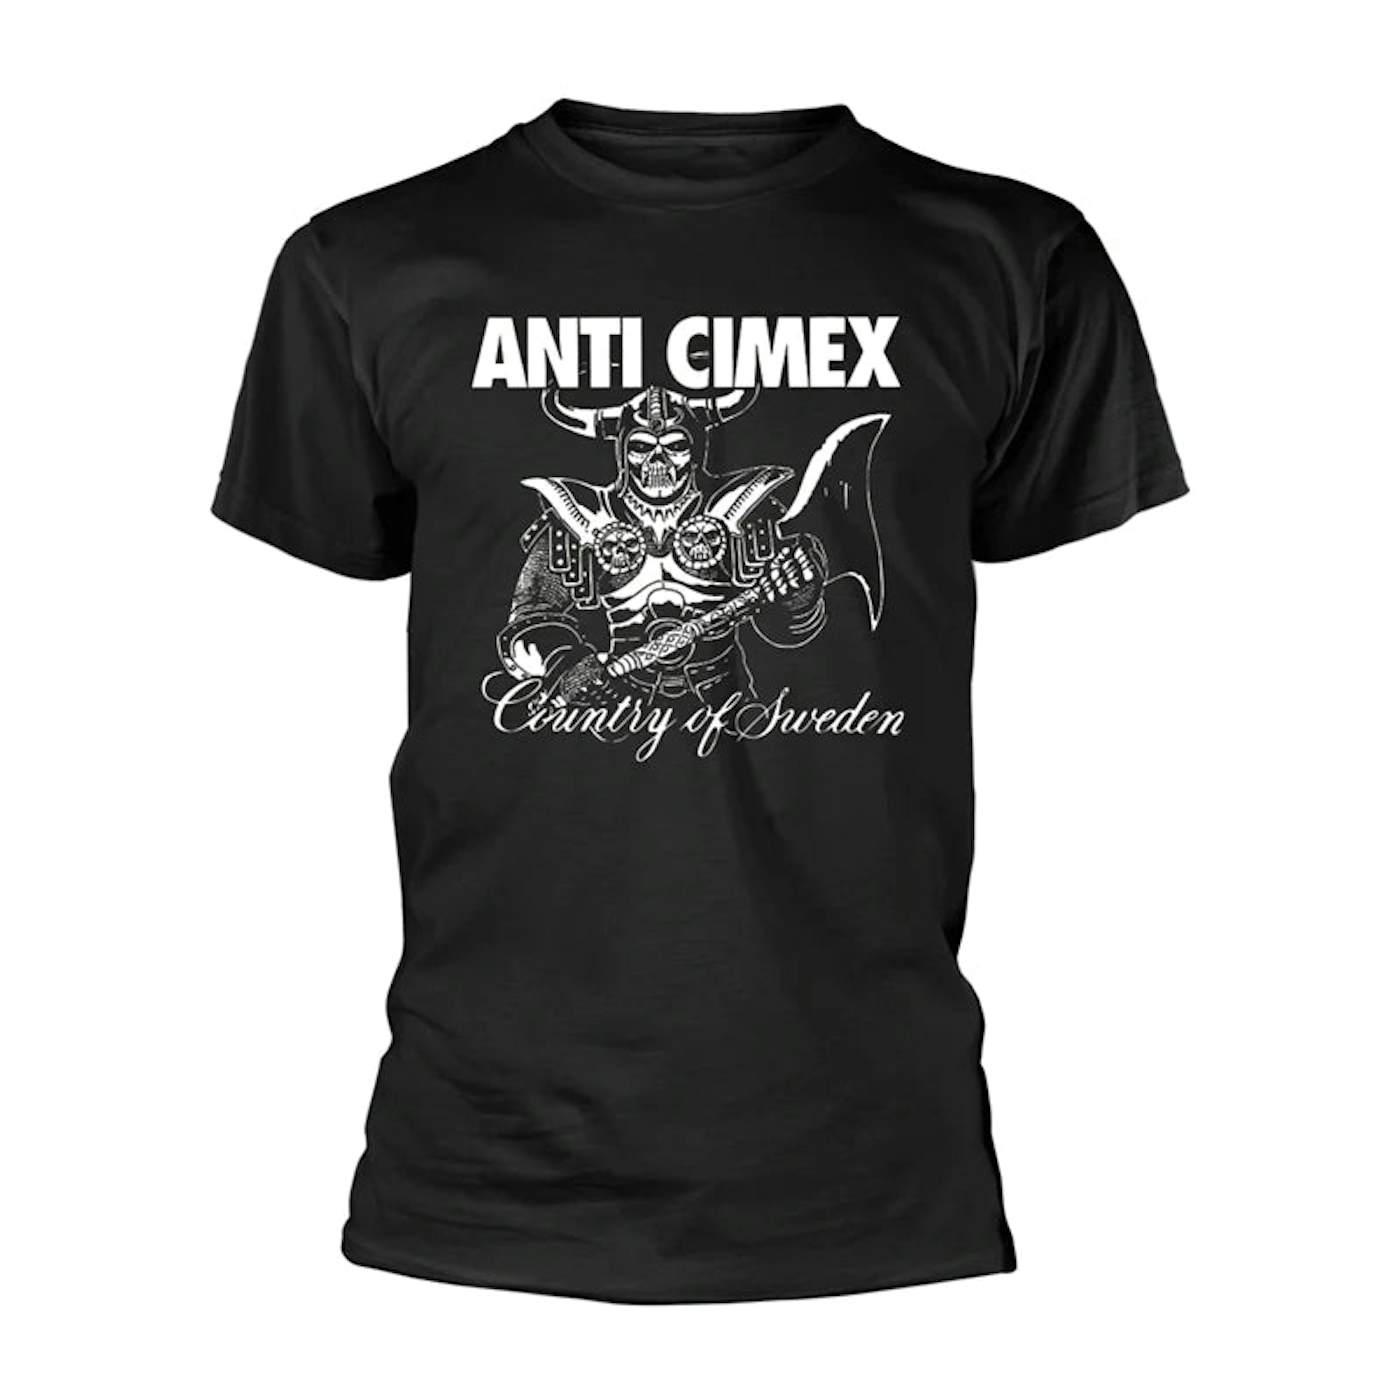 Anti Cimex T Shirt - Country Of Sweden